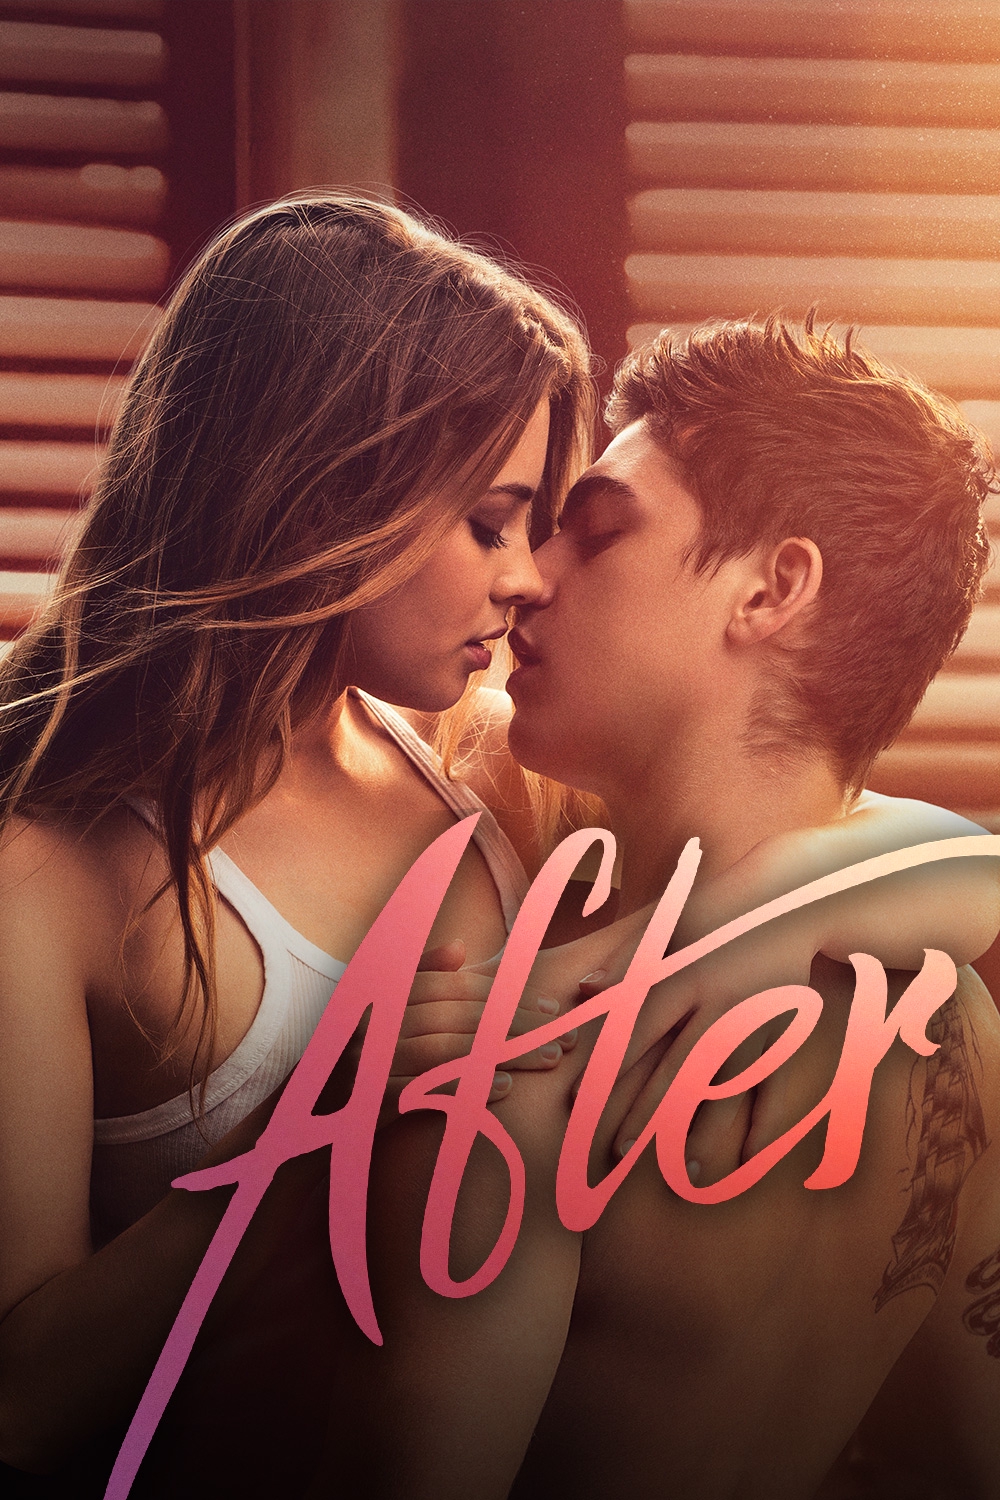 Watch After the First 48 Season 2 Episode 9 | A&E